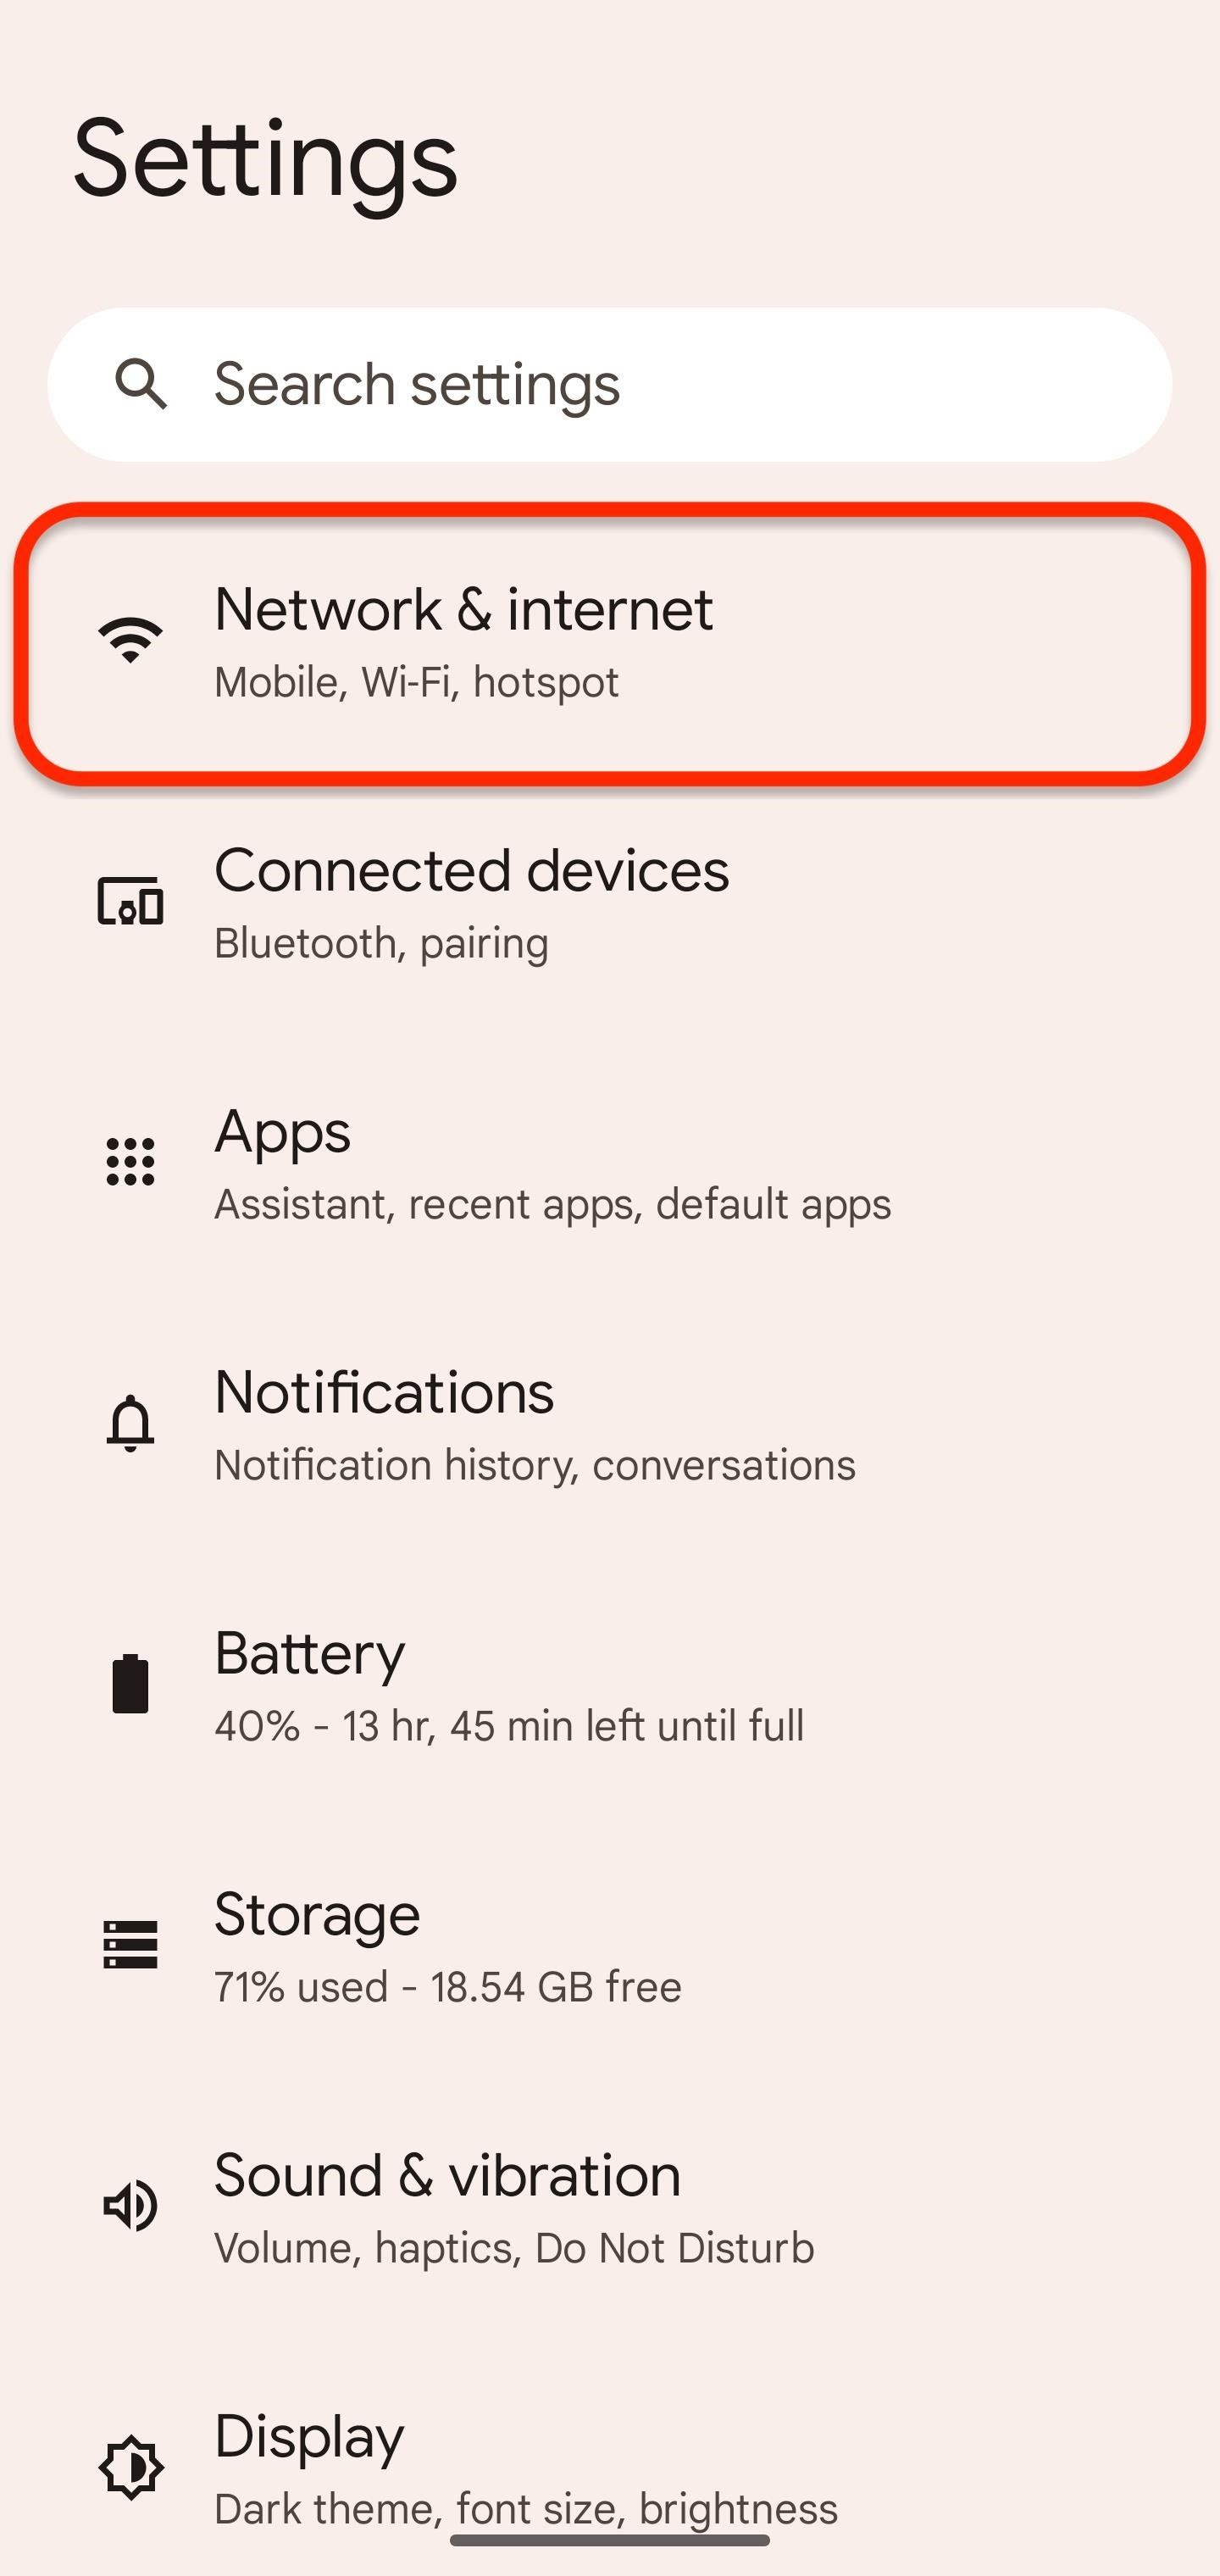 Go to the Wi-Fi settings on your Android device.
Find the Wi-Fi network you are currently connected to.